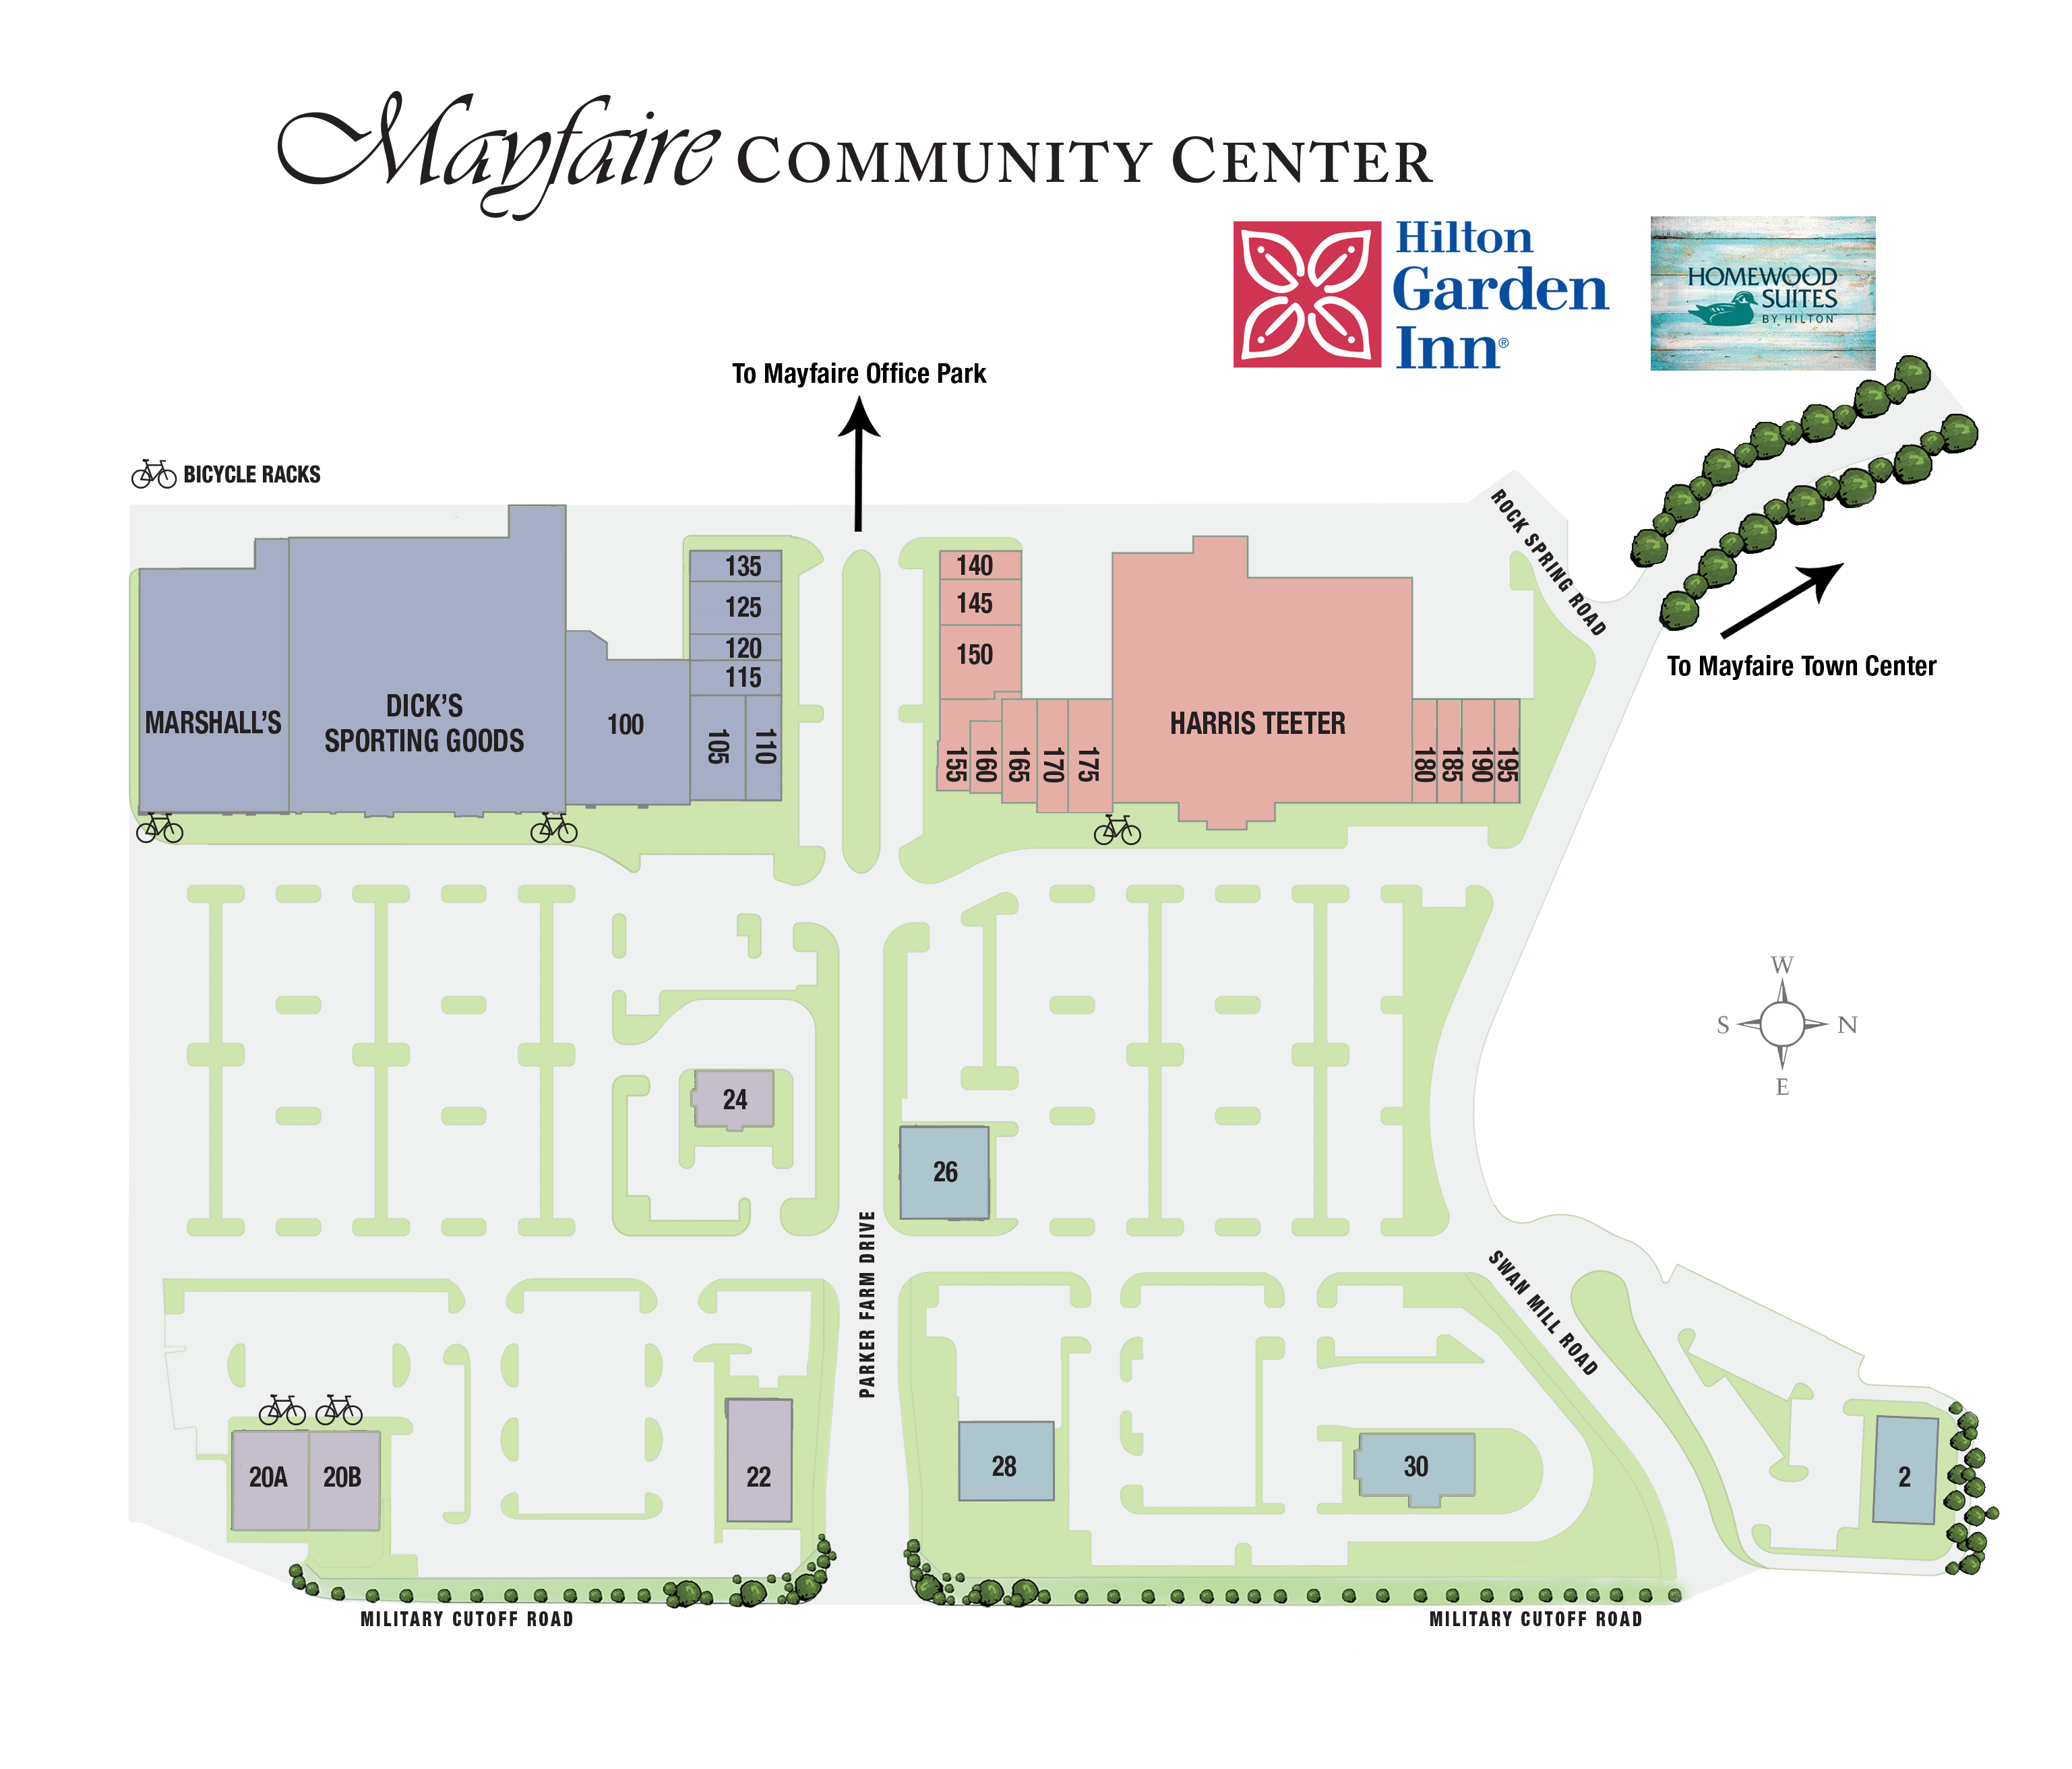 Mayfaire Community Center directory map